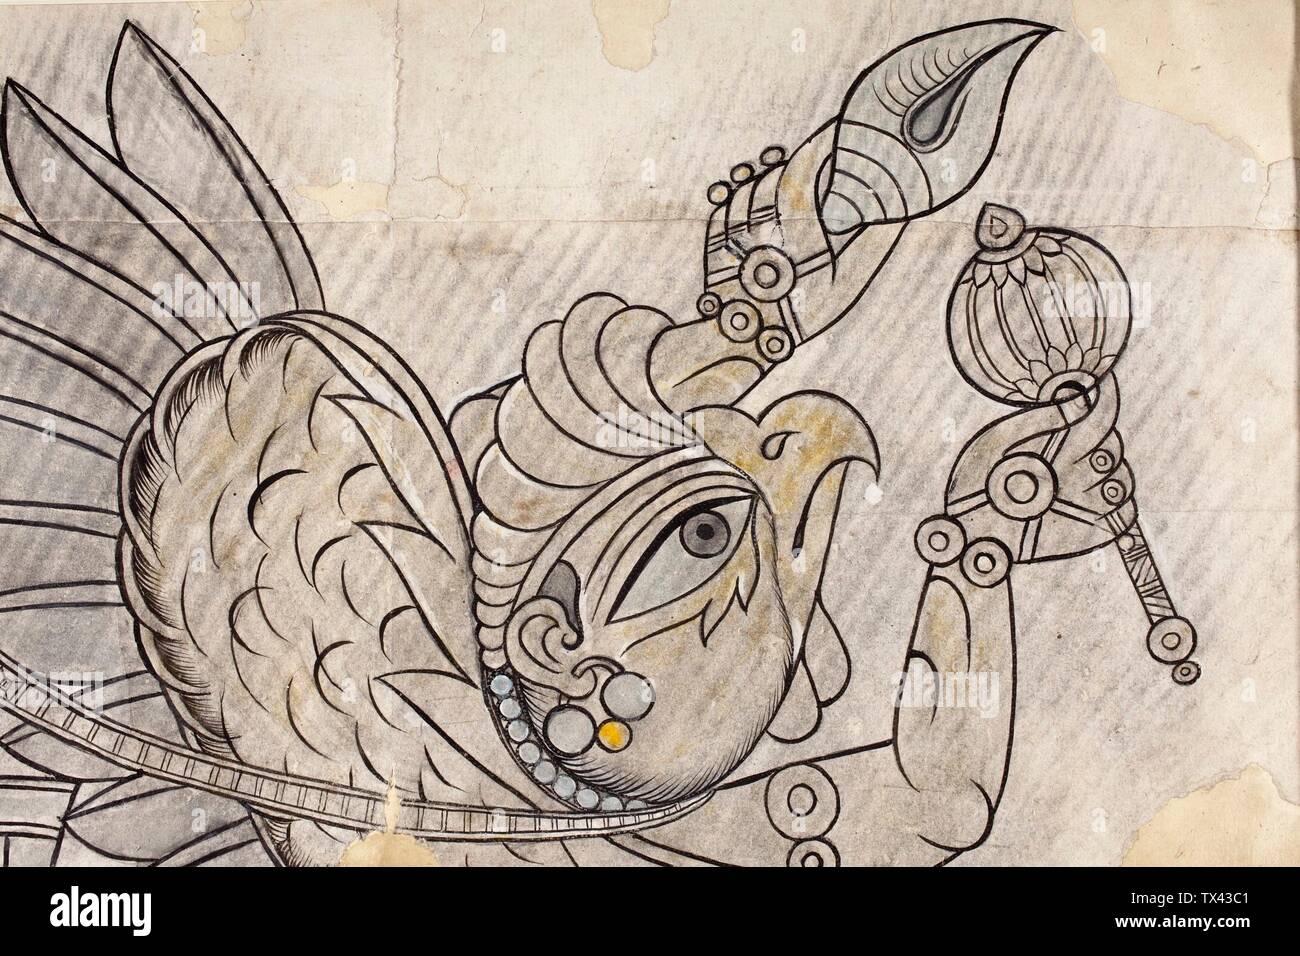 Garuda Flying through the Air (image 2 of 3);  India, Rajasthan, Bundi, circa 1750-1775 Drawings Ink and opaque watercolor on paper 24 1/4 x 27 3/8 in. (61.59 x 69.53 cm) Gift of Paul F. Walter (M.79.191.24) South and Southeast Asian Art; between circa 1750 and circa 1775 date QS:P571,+1750-00-00T00:00:00Z/7,P1319,+1750-00-00T00:00:00Z/9,P1326,+1775-00-00T00:00:00Z/9,P1480,Q5727902; Stock Photo